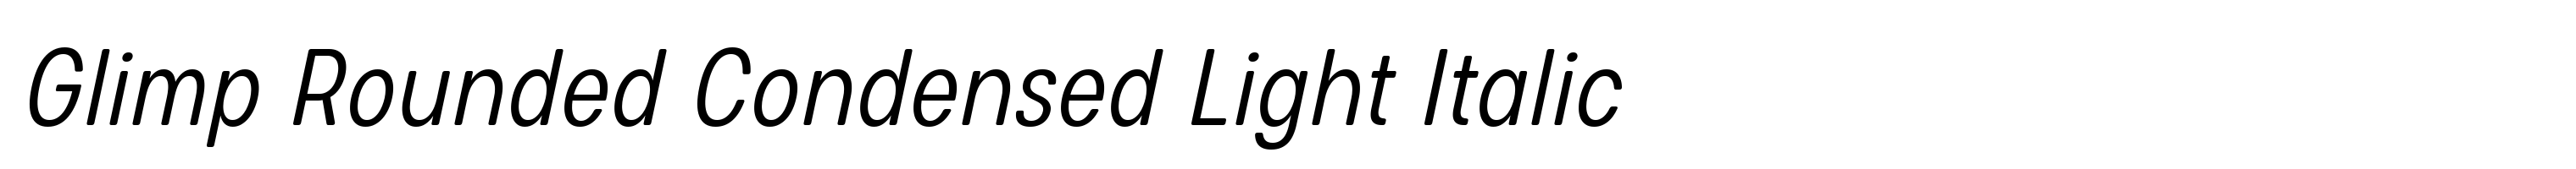 Glimp Rounded Condensed Light Italic